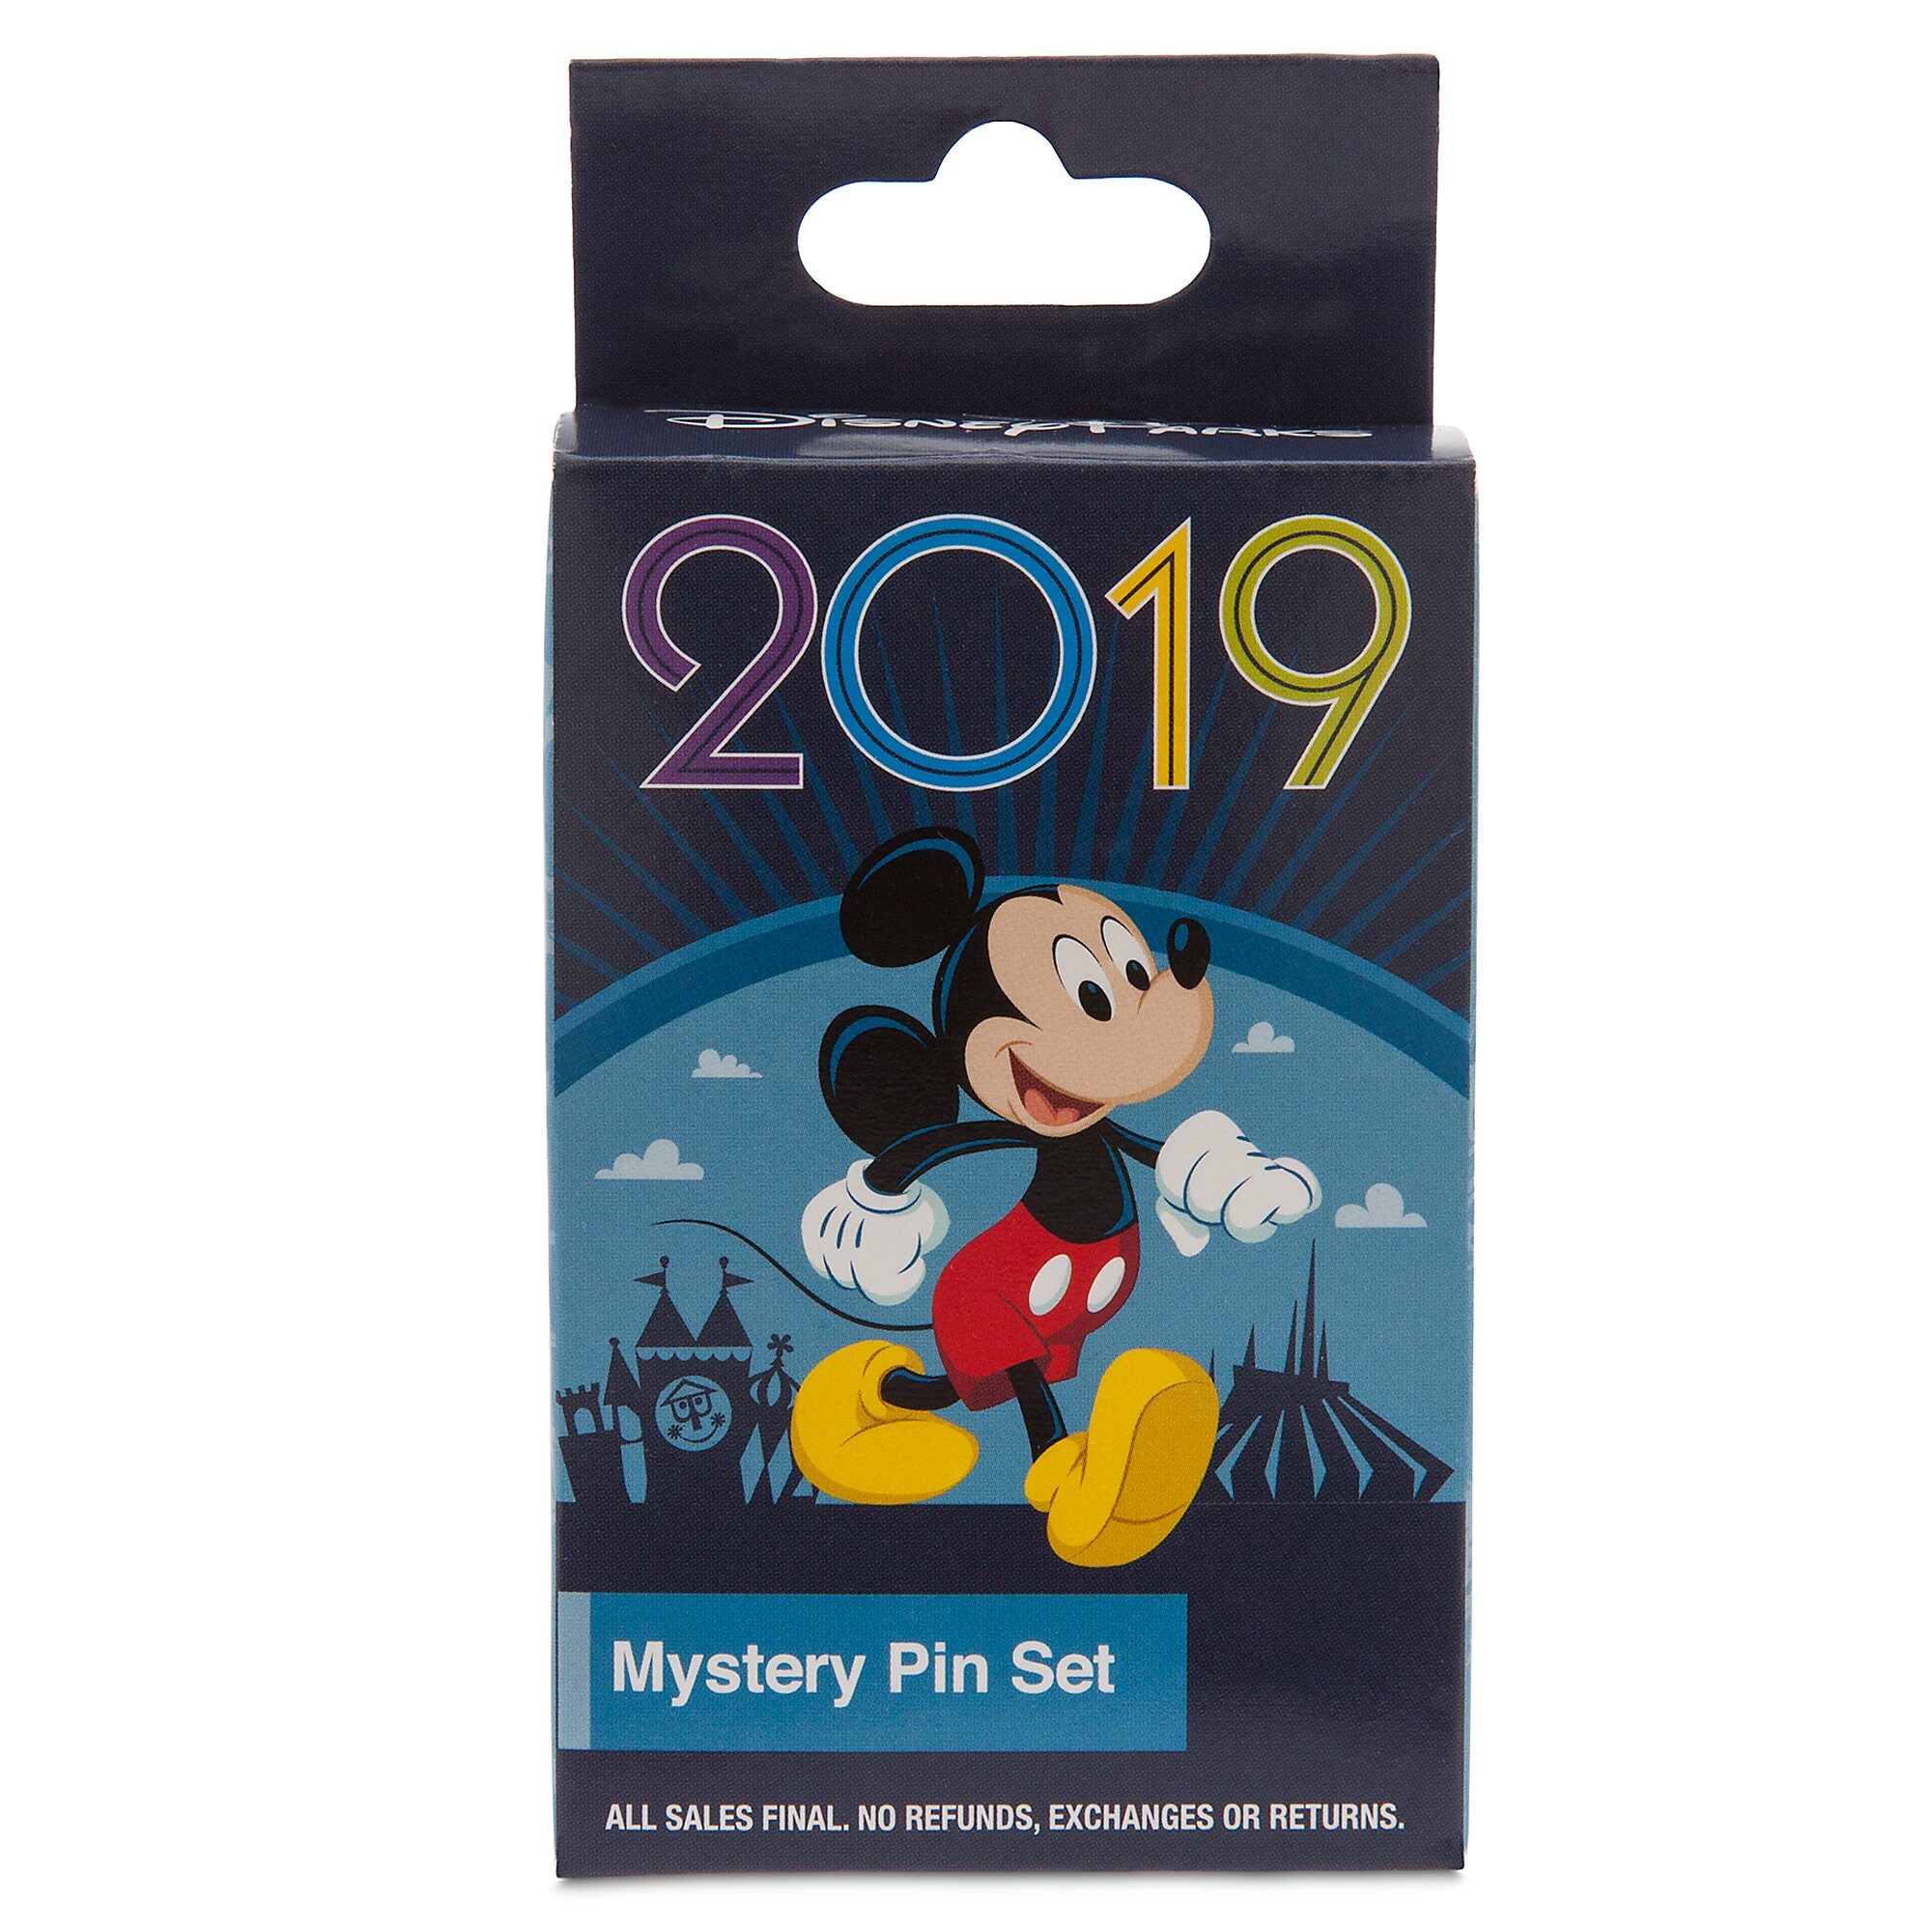 Disney Parks 2019 Mystery Pin Set released today Dis